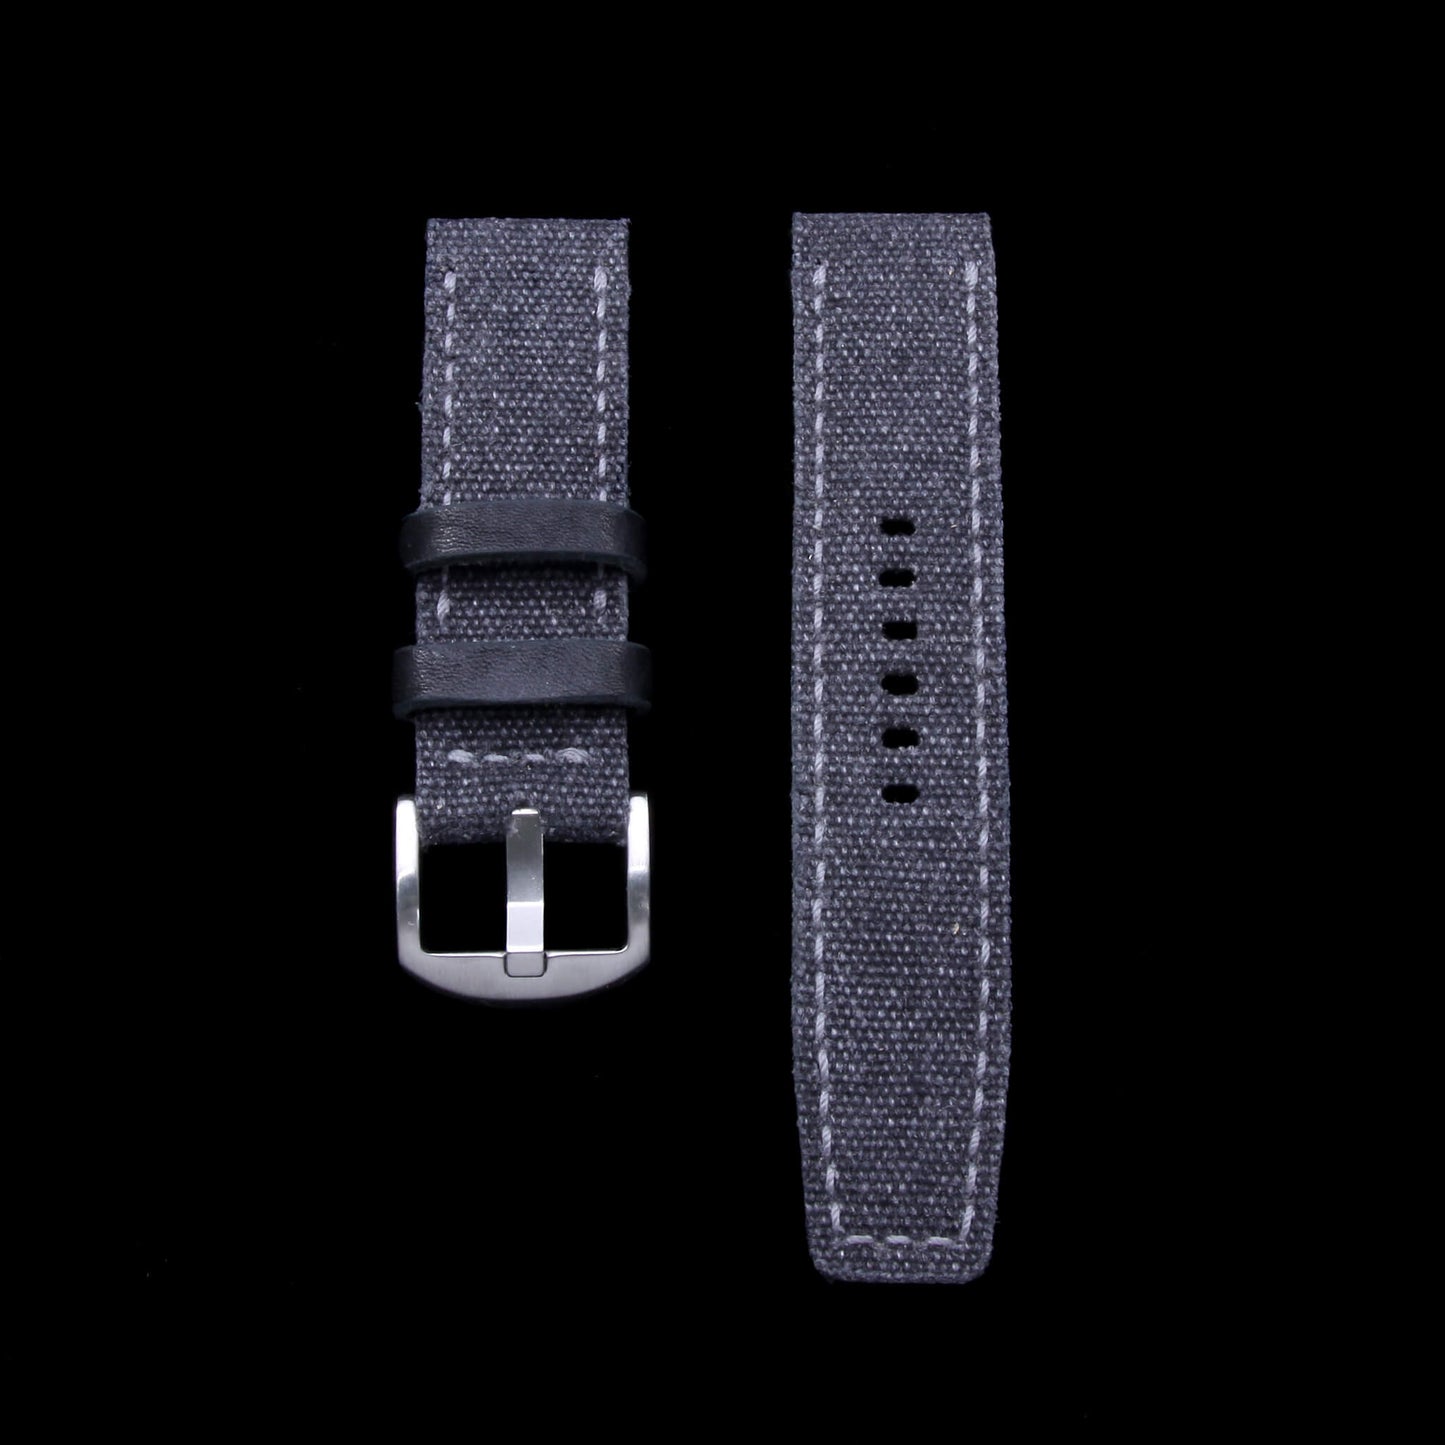 2nd View of 2-Piece Full Stitch Leather Watch Strap, made with Stone Washed Black Canvas and Italian veg-tanned leather lining, handcrafted by Cozy Handmade